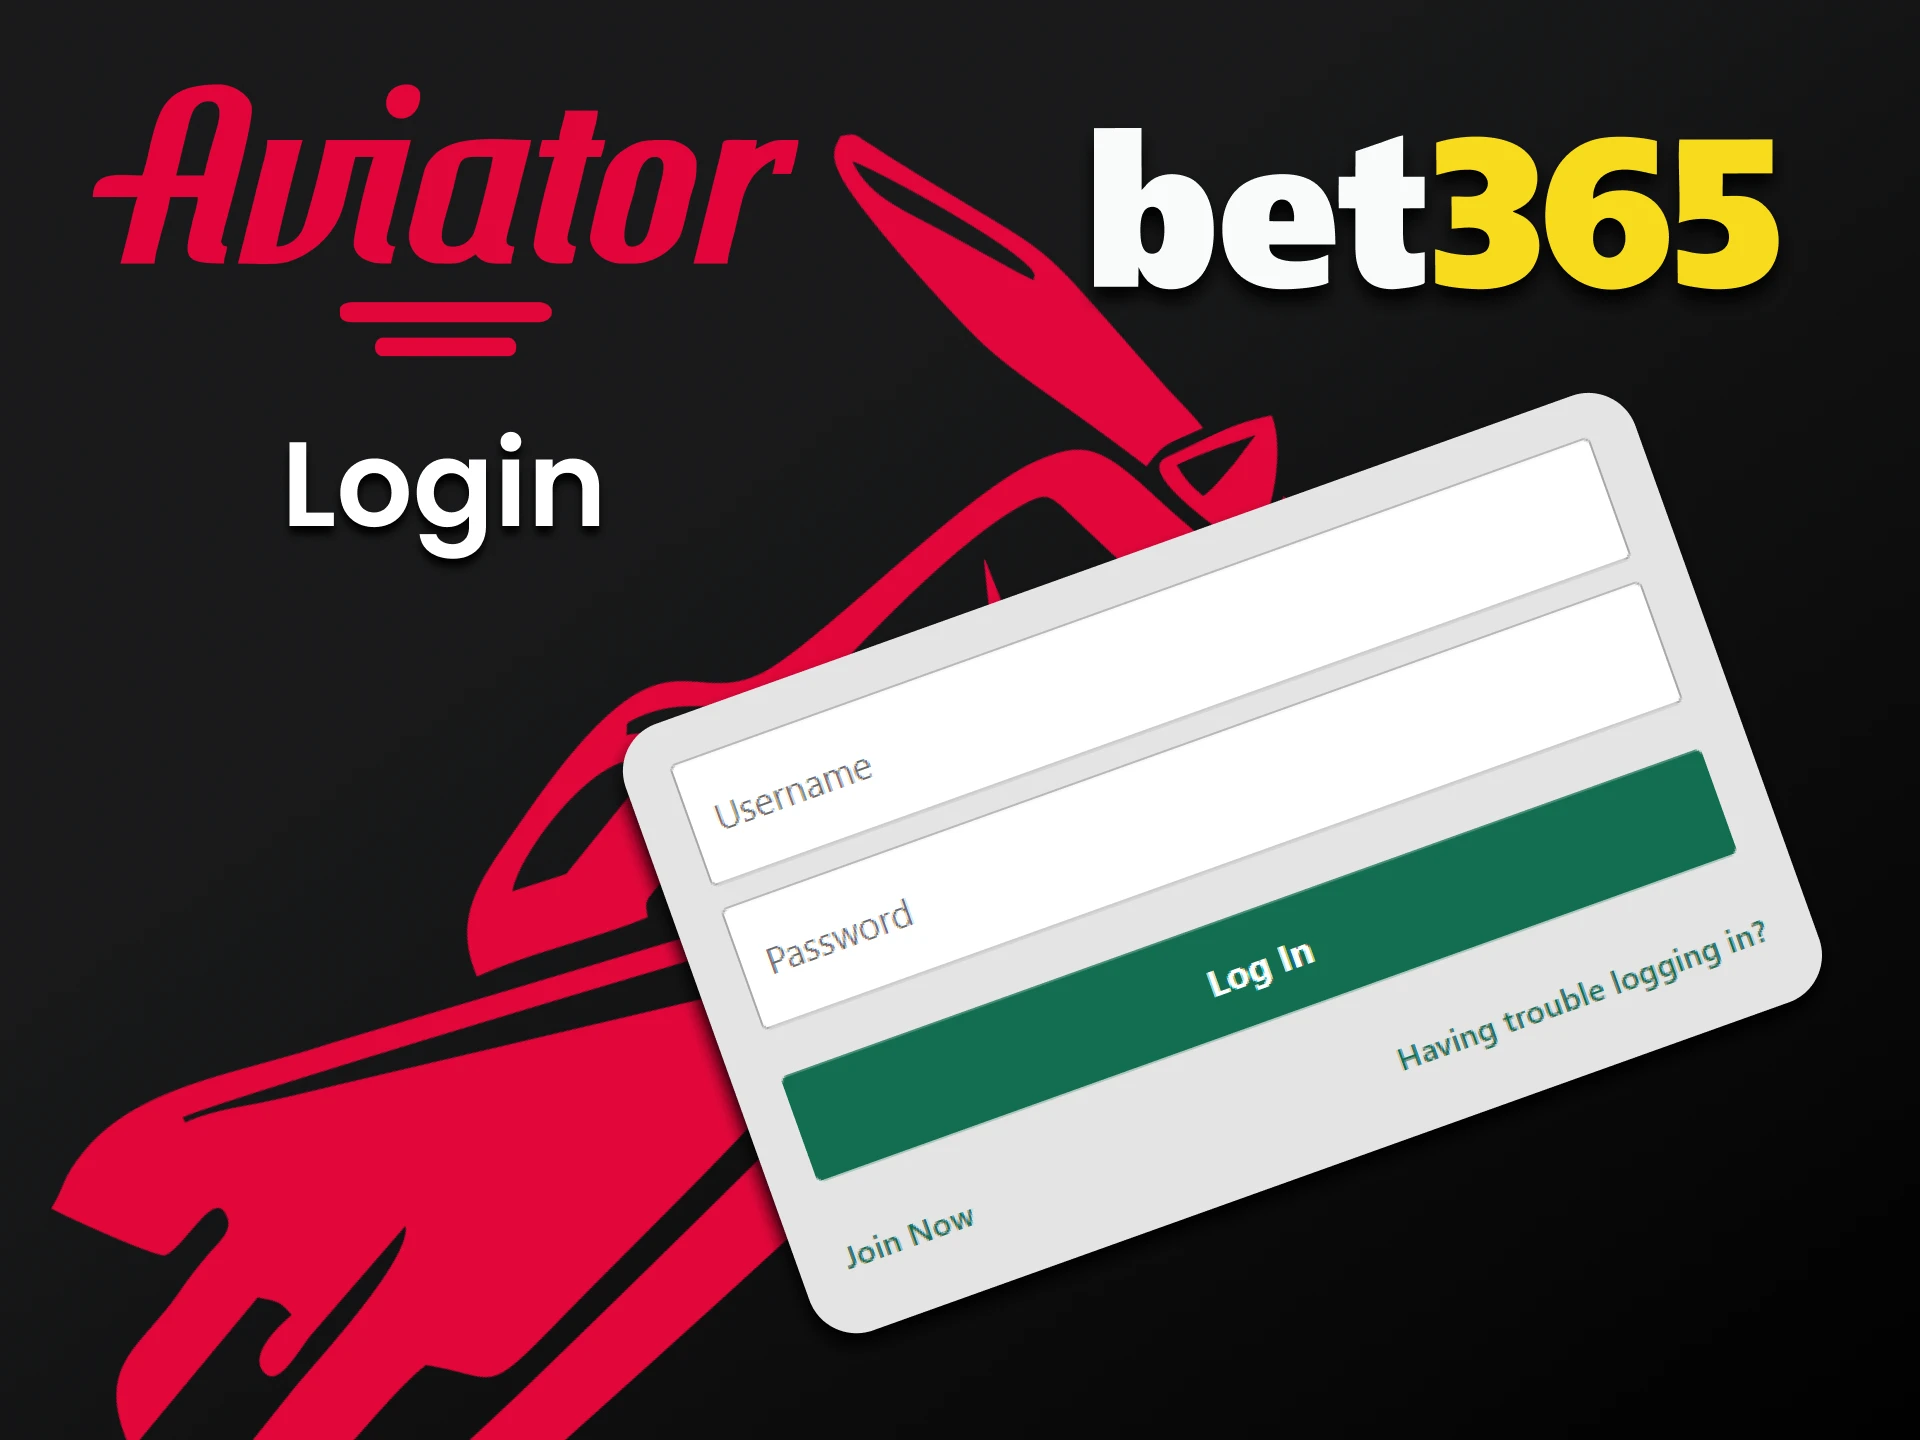 To play Aviator you need to log into your Bet365 account.